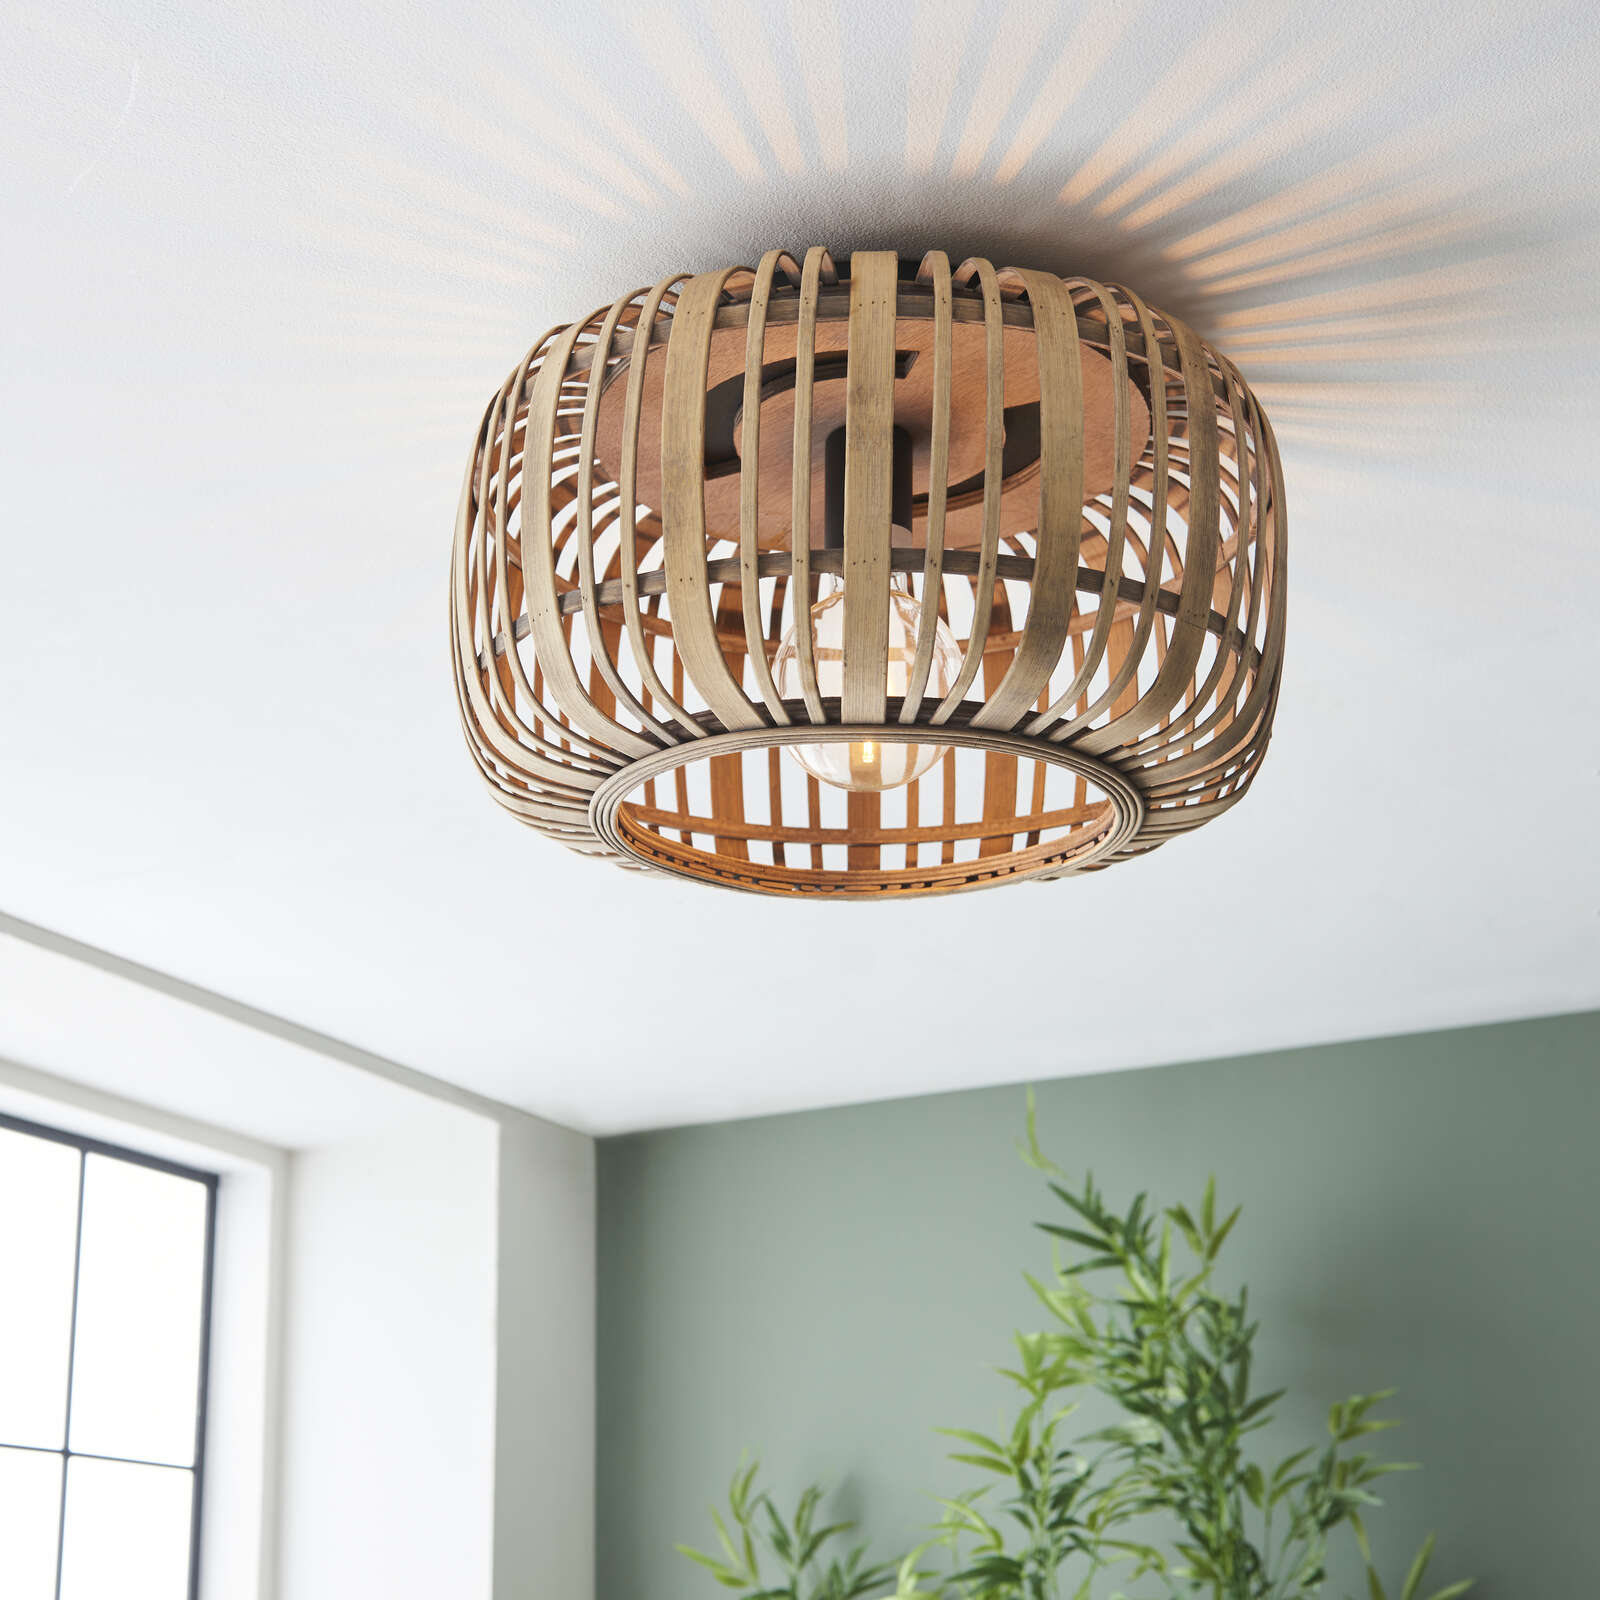             Bamboo ceiling light - Willi 6 - Brown
        